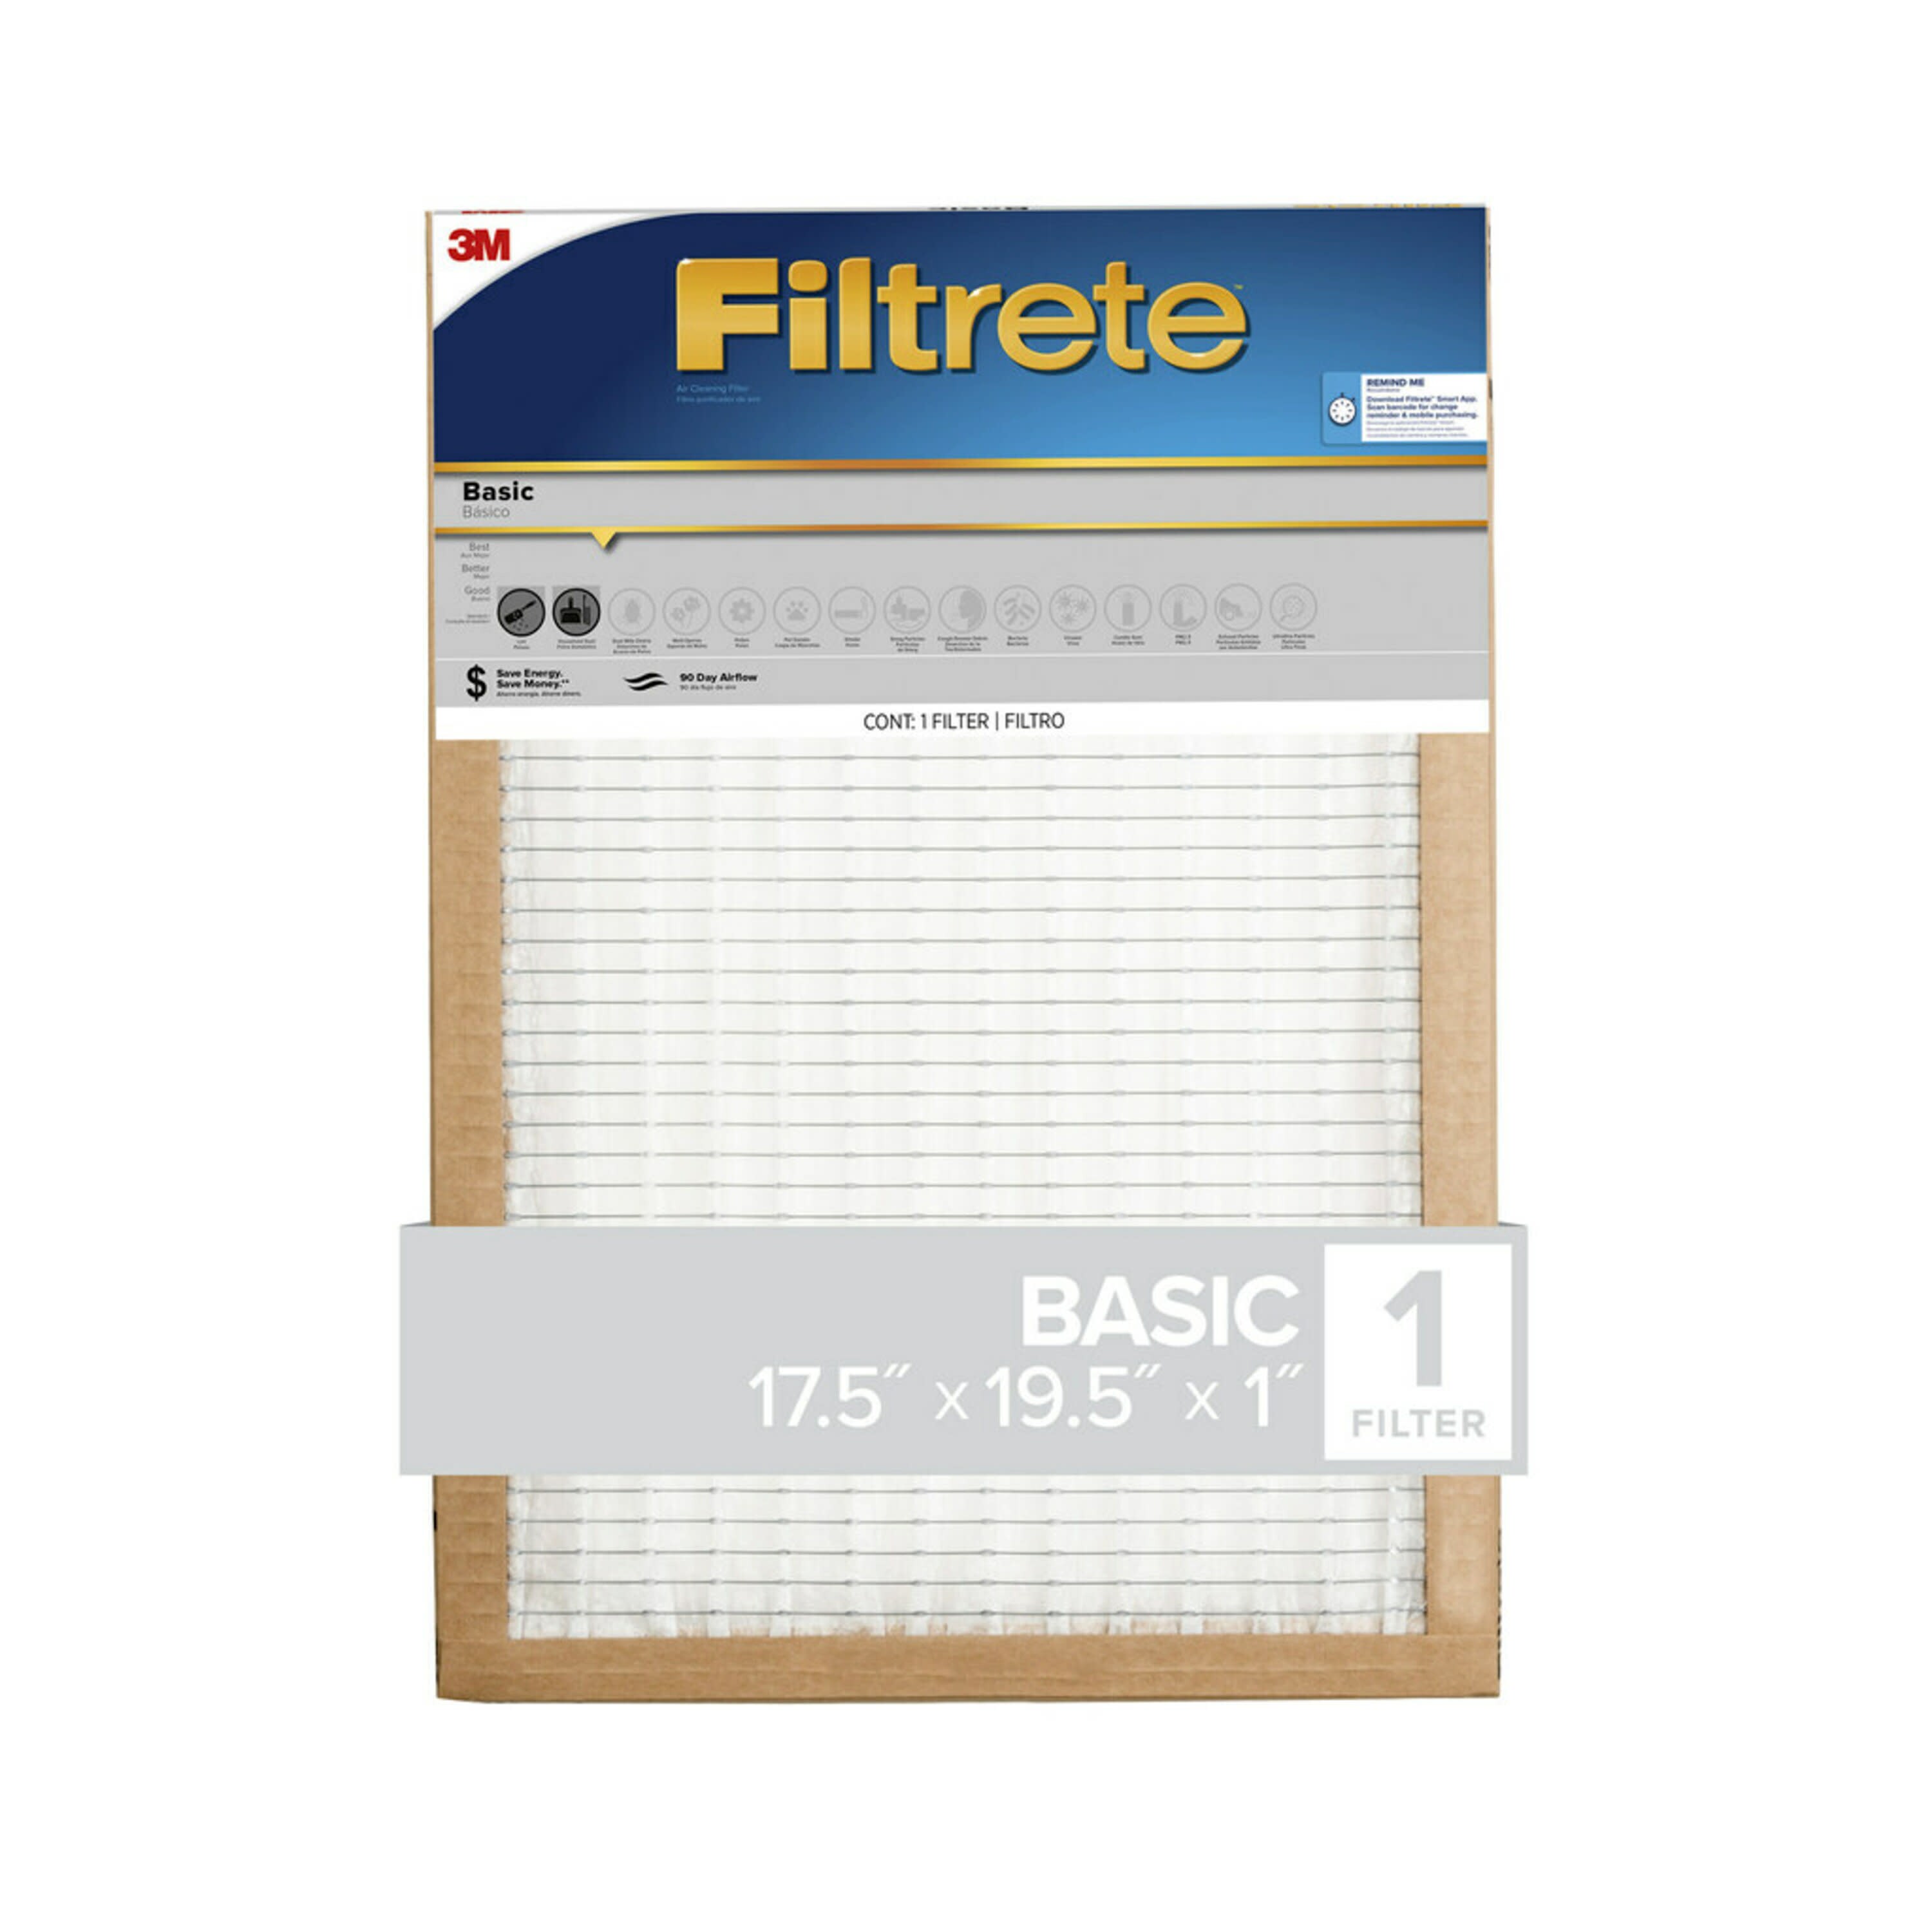 3M Filtrete Room Air Conditioner Filter 15 " X 24 " X 1/8 " Package quantity 1 